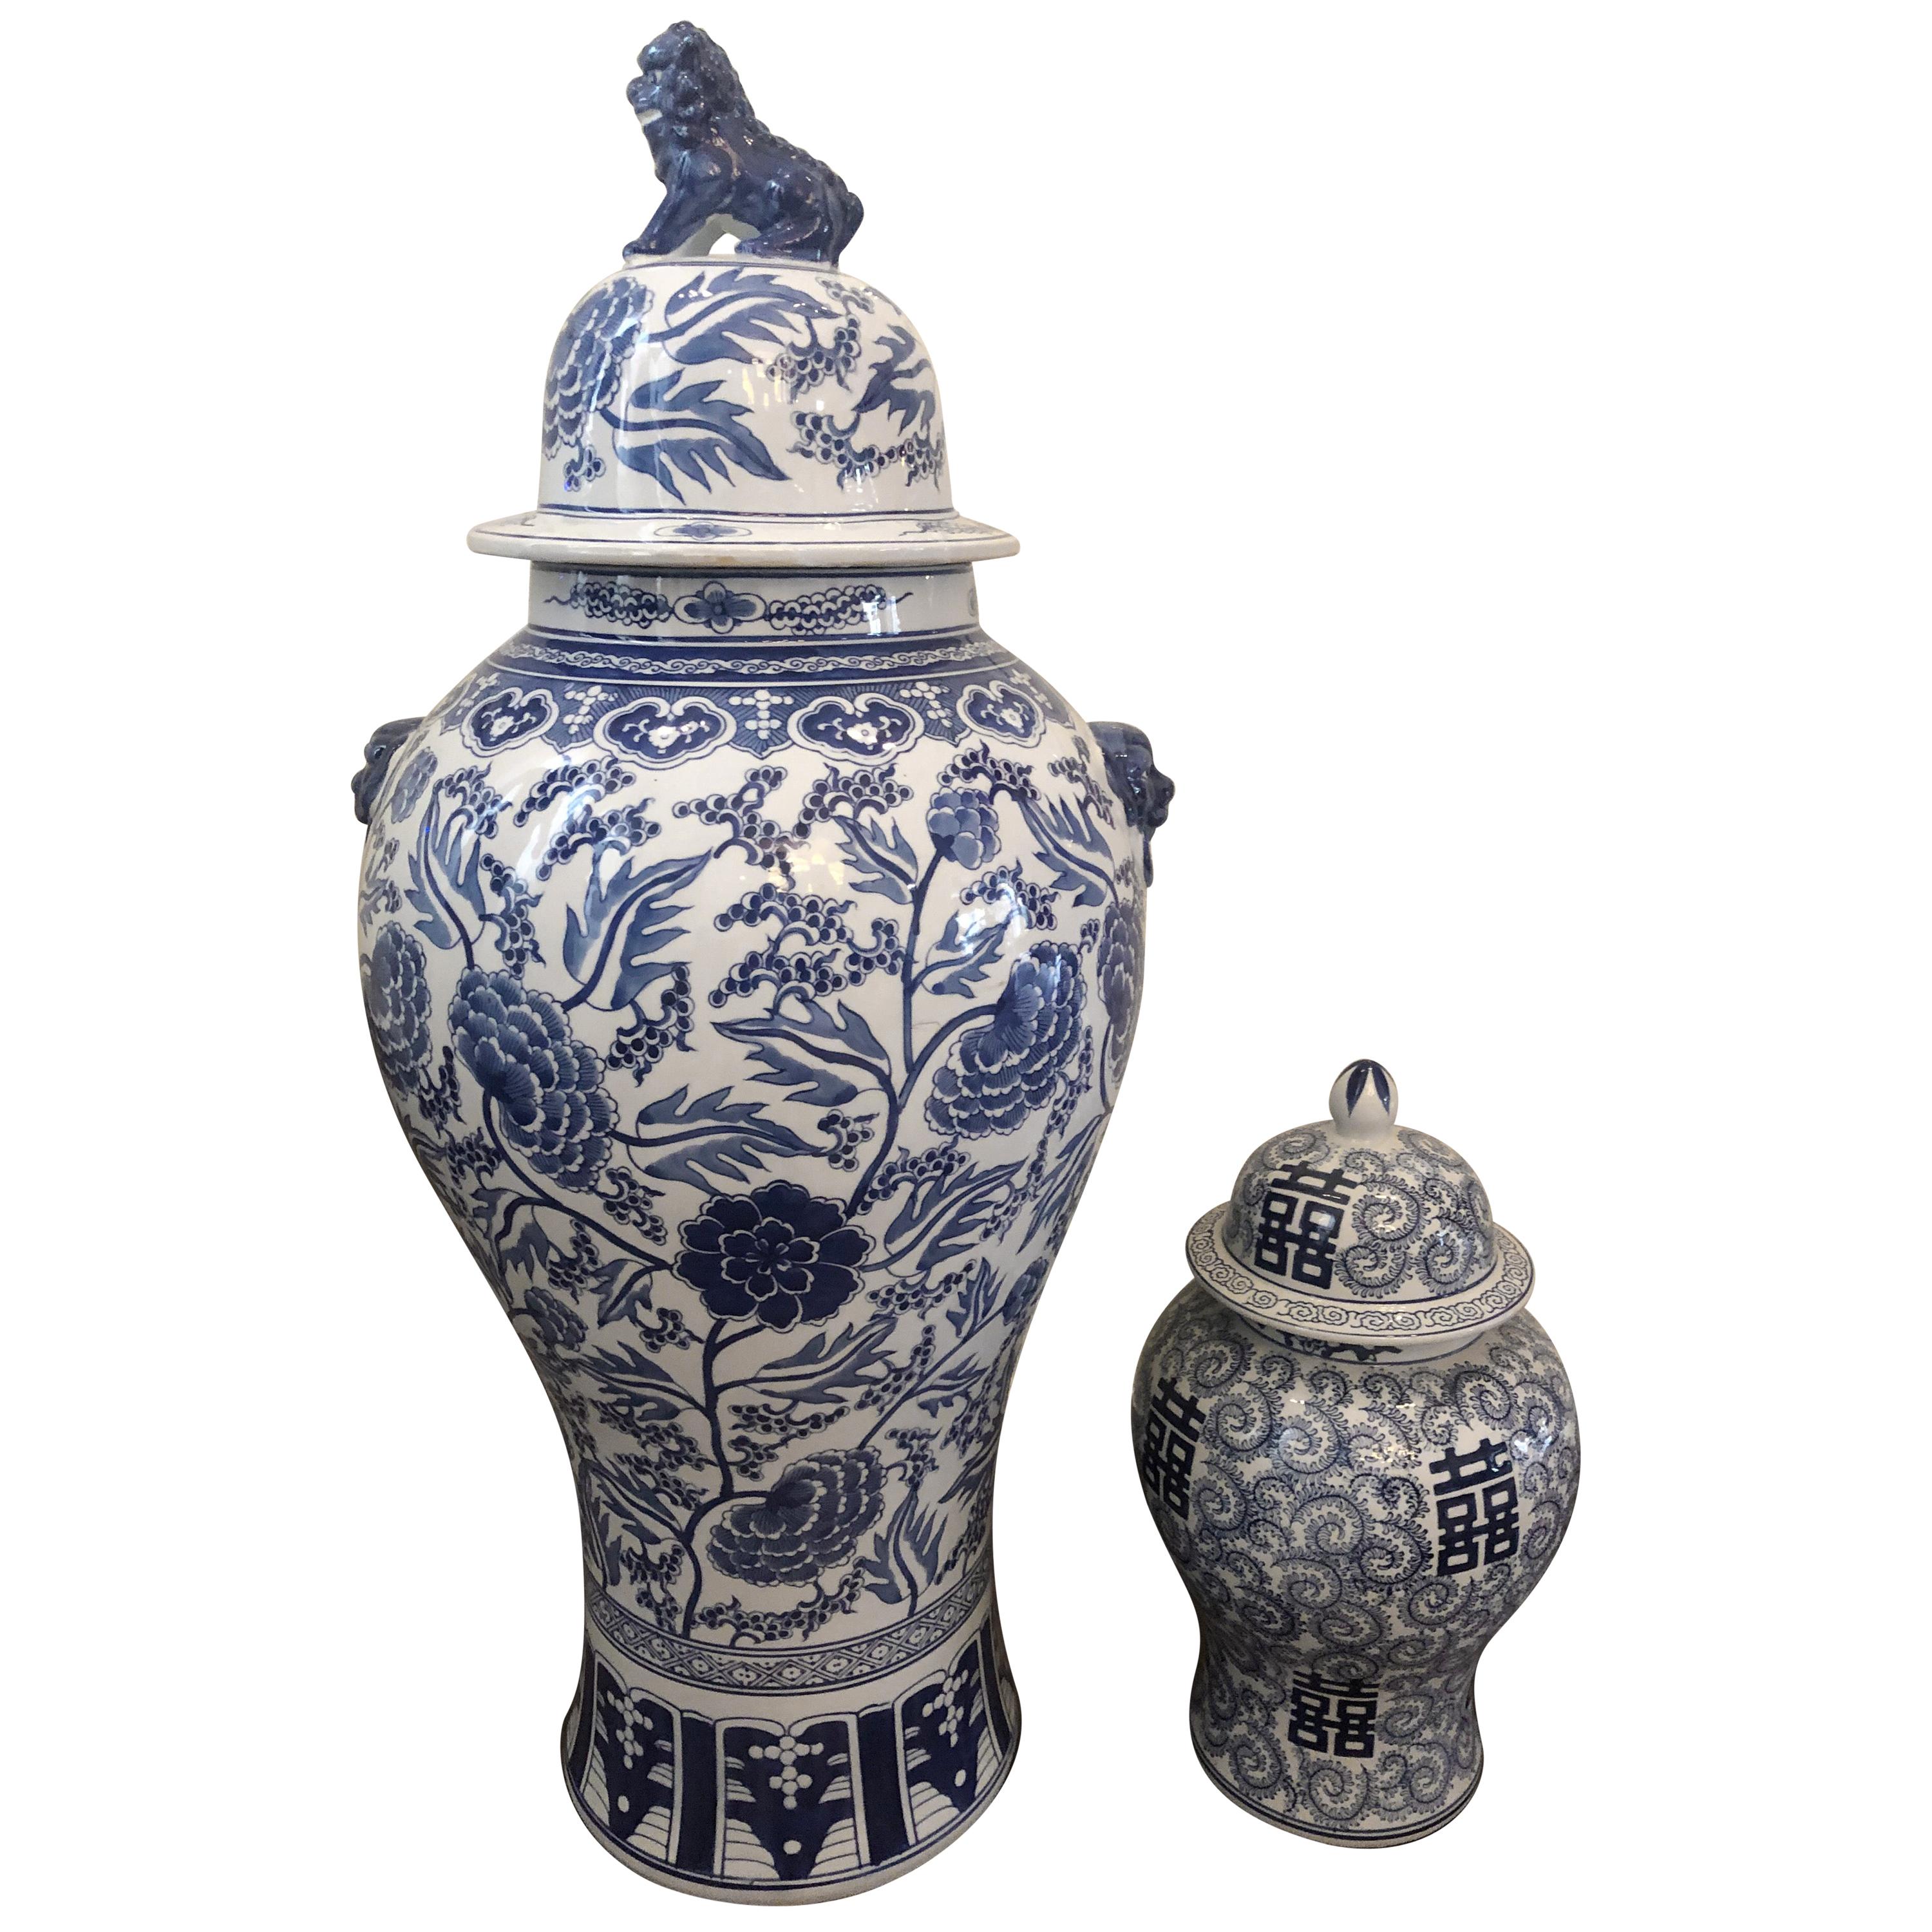 Big Floor 20th Century Blue and White Chinese Porcelain Vases